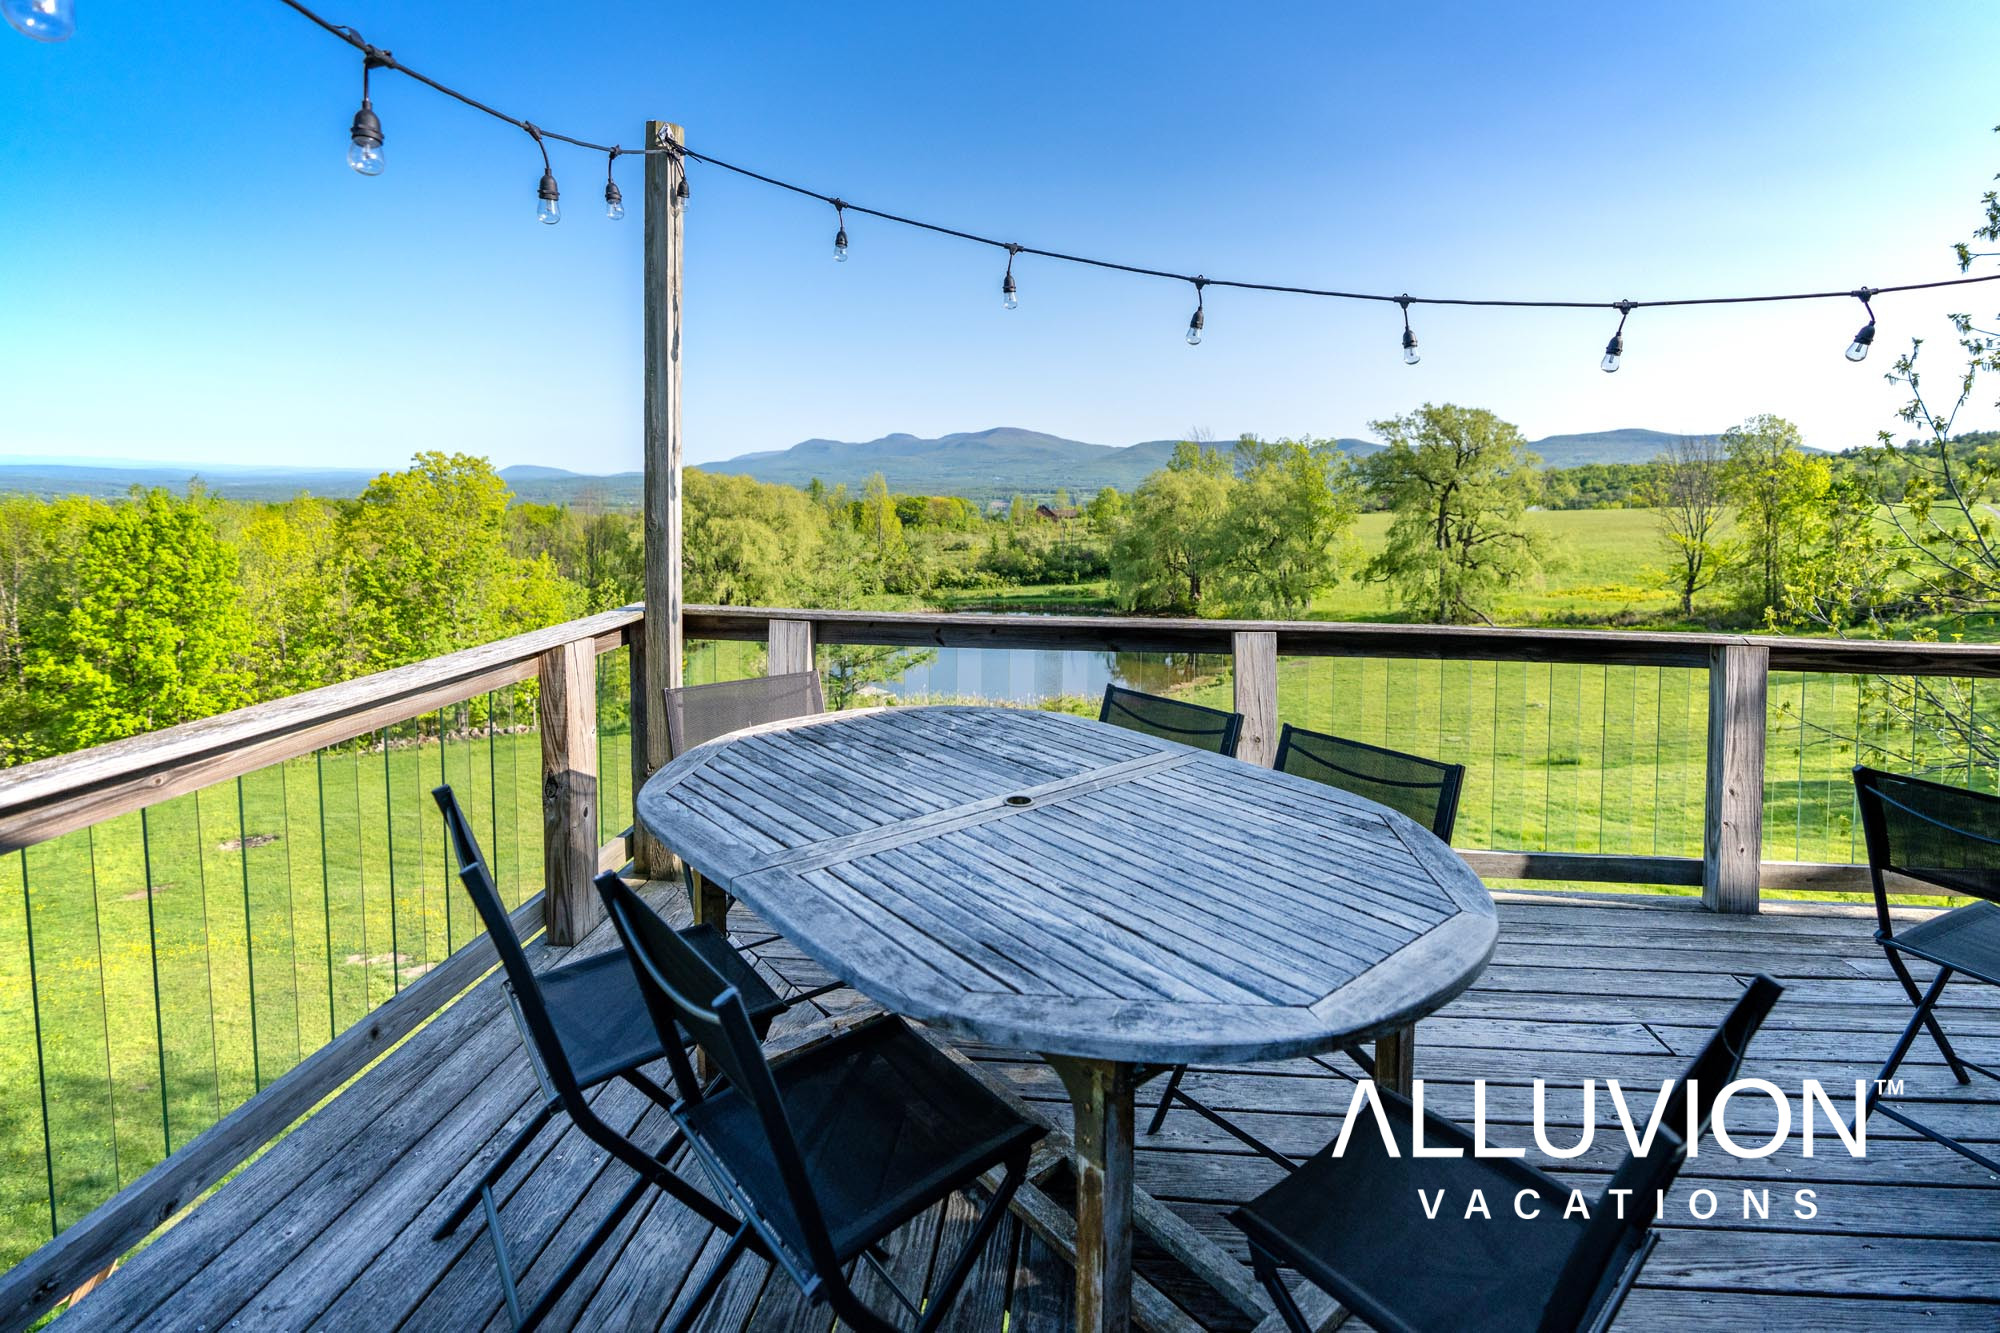 Explore the Ultimate Retreat at the Rustic Mountain Cabin in the Catskills: Photo Tour by Photographer Maxwell Alexander – Presented by Alluvion Vacations